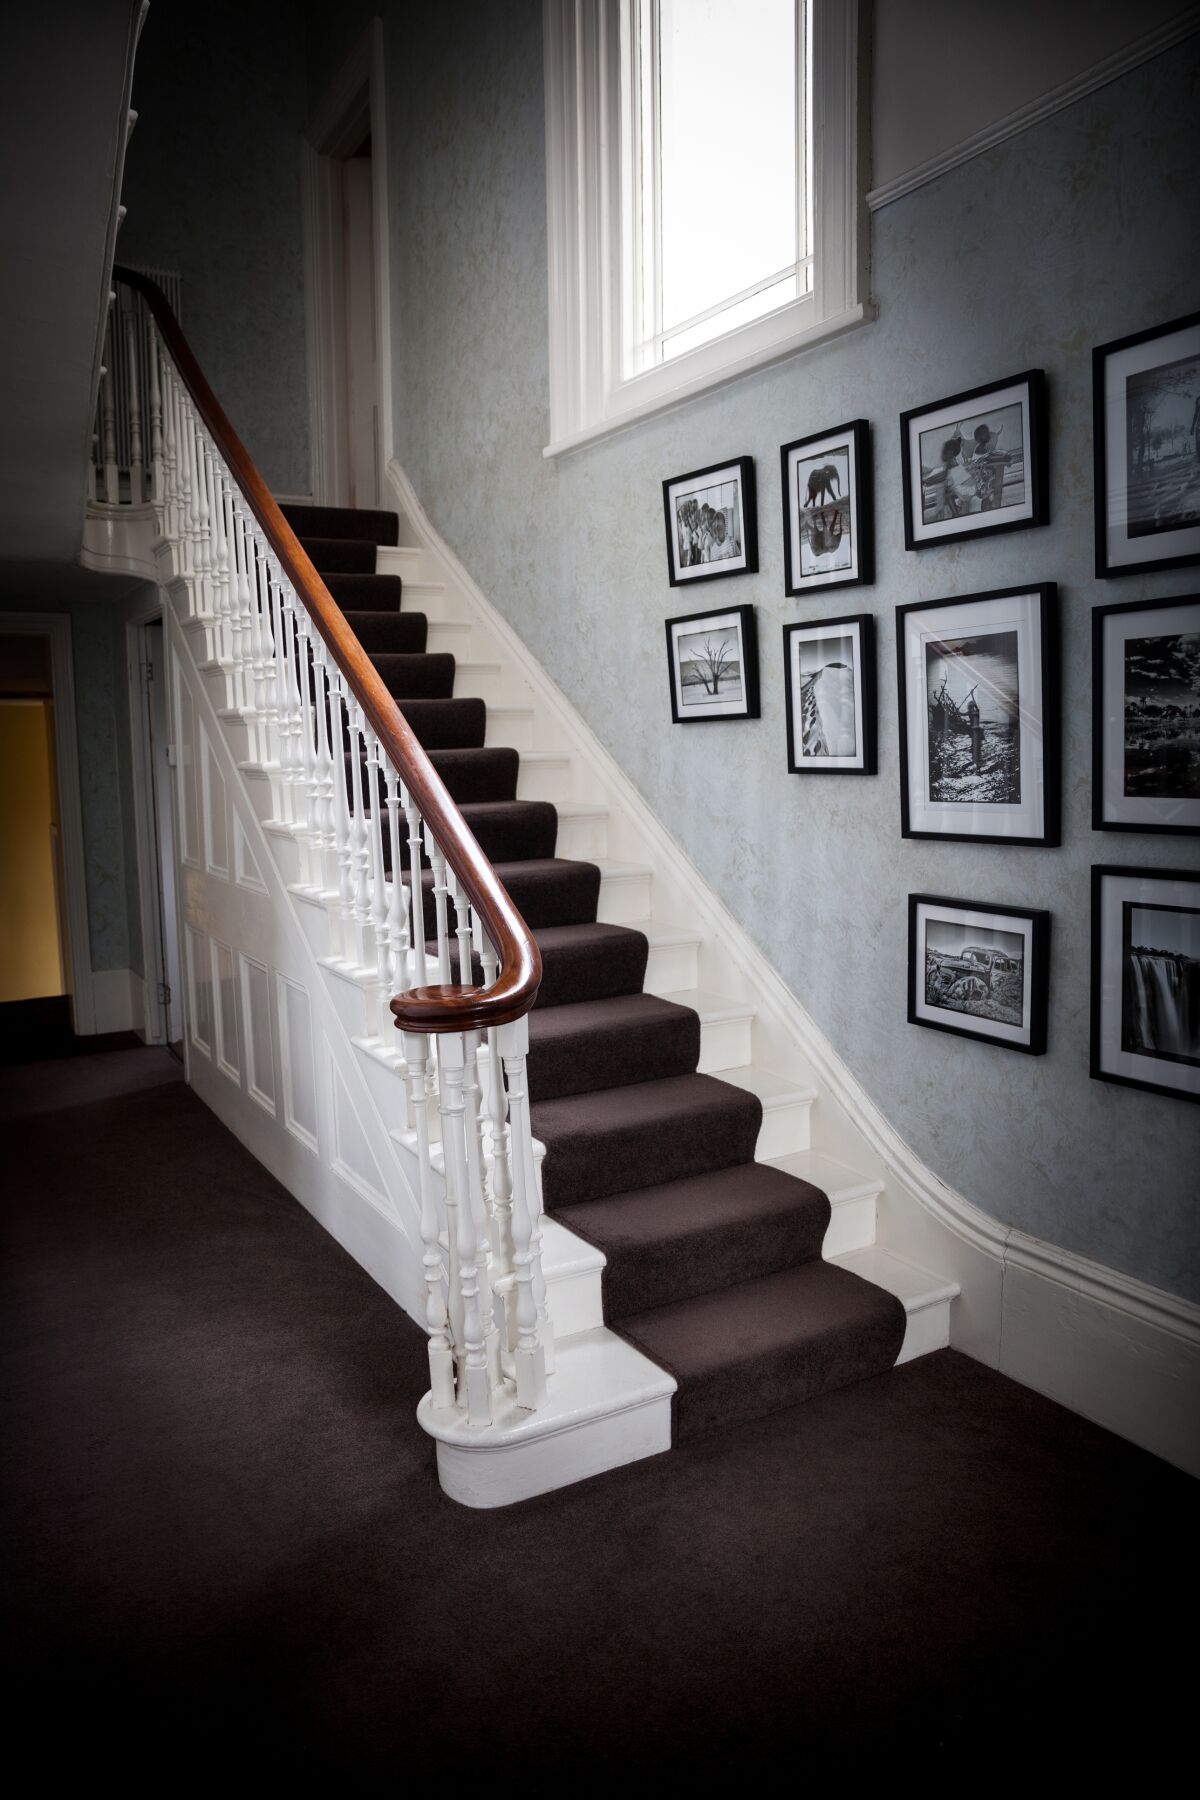 An array of framed photos line the wall of a staircase.